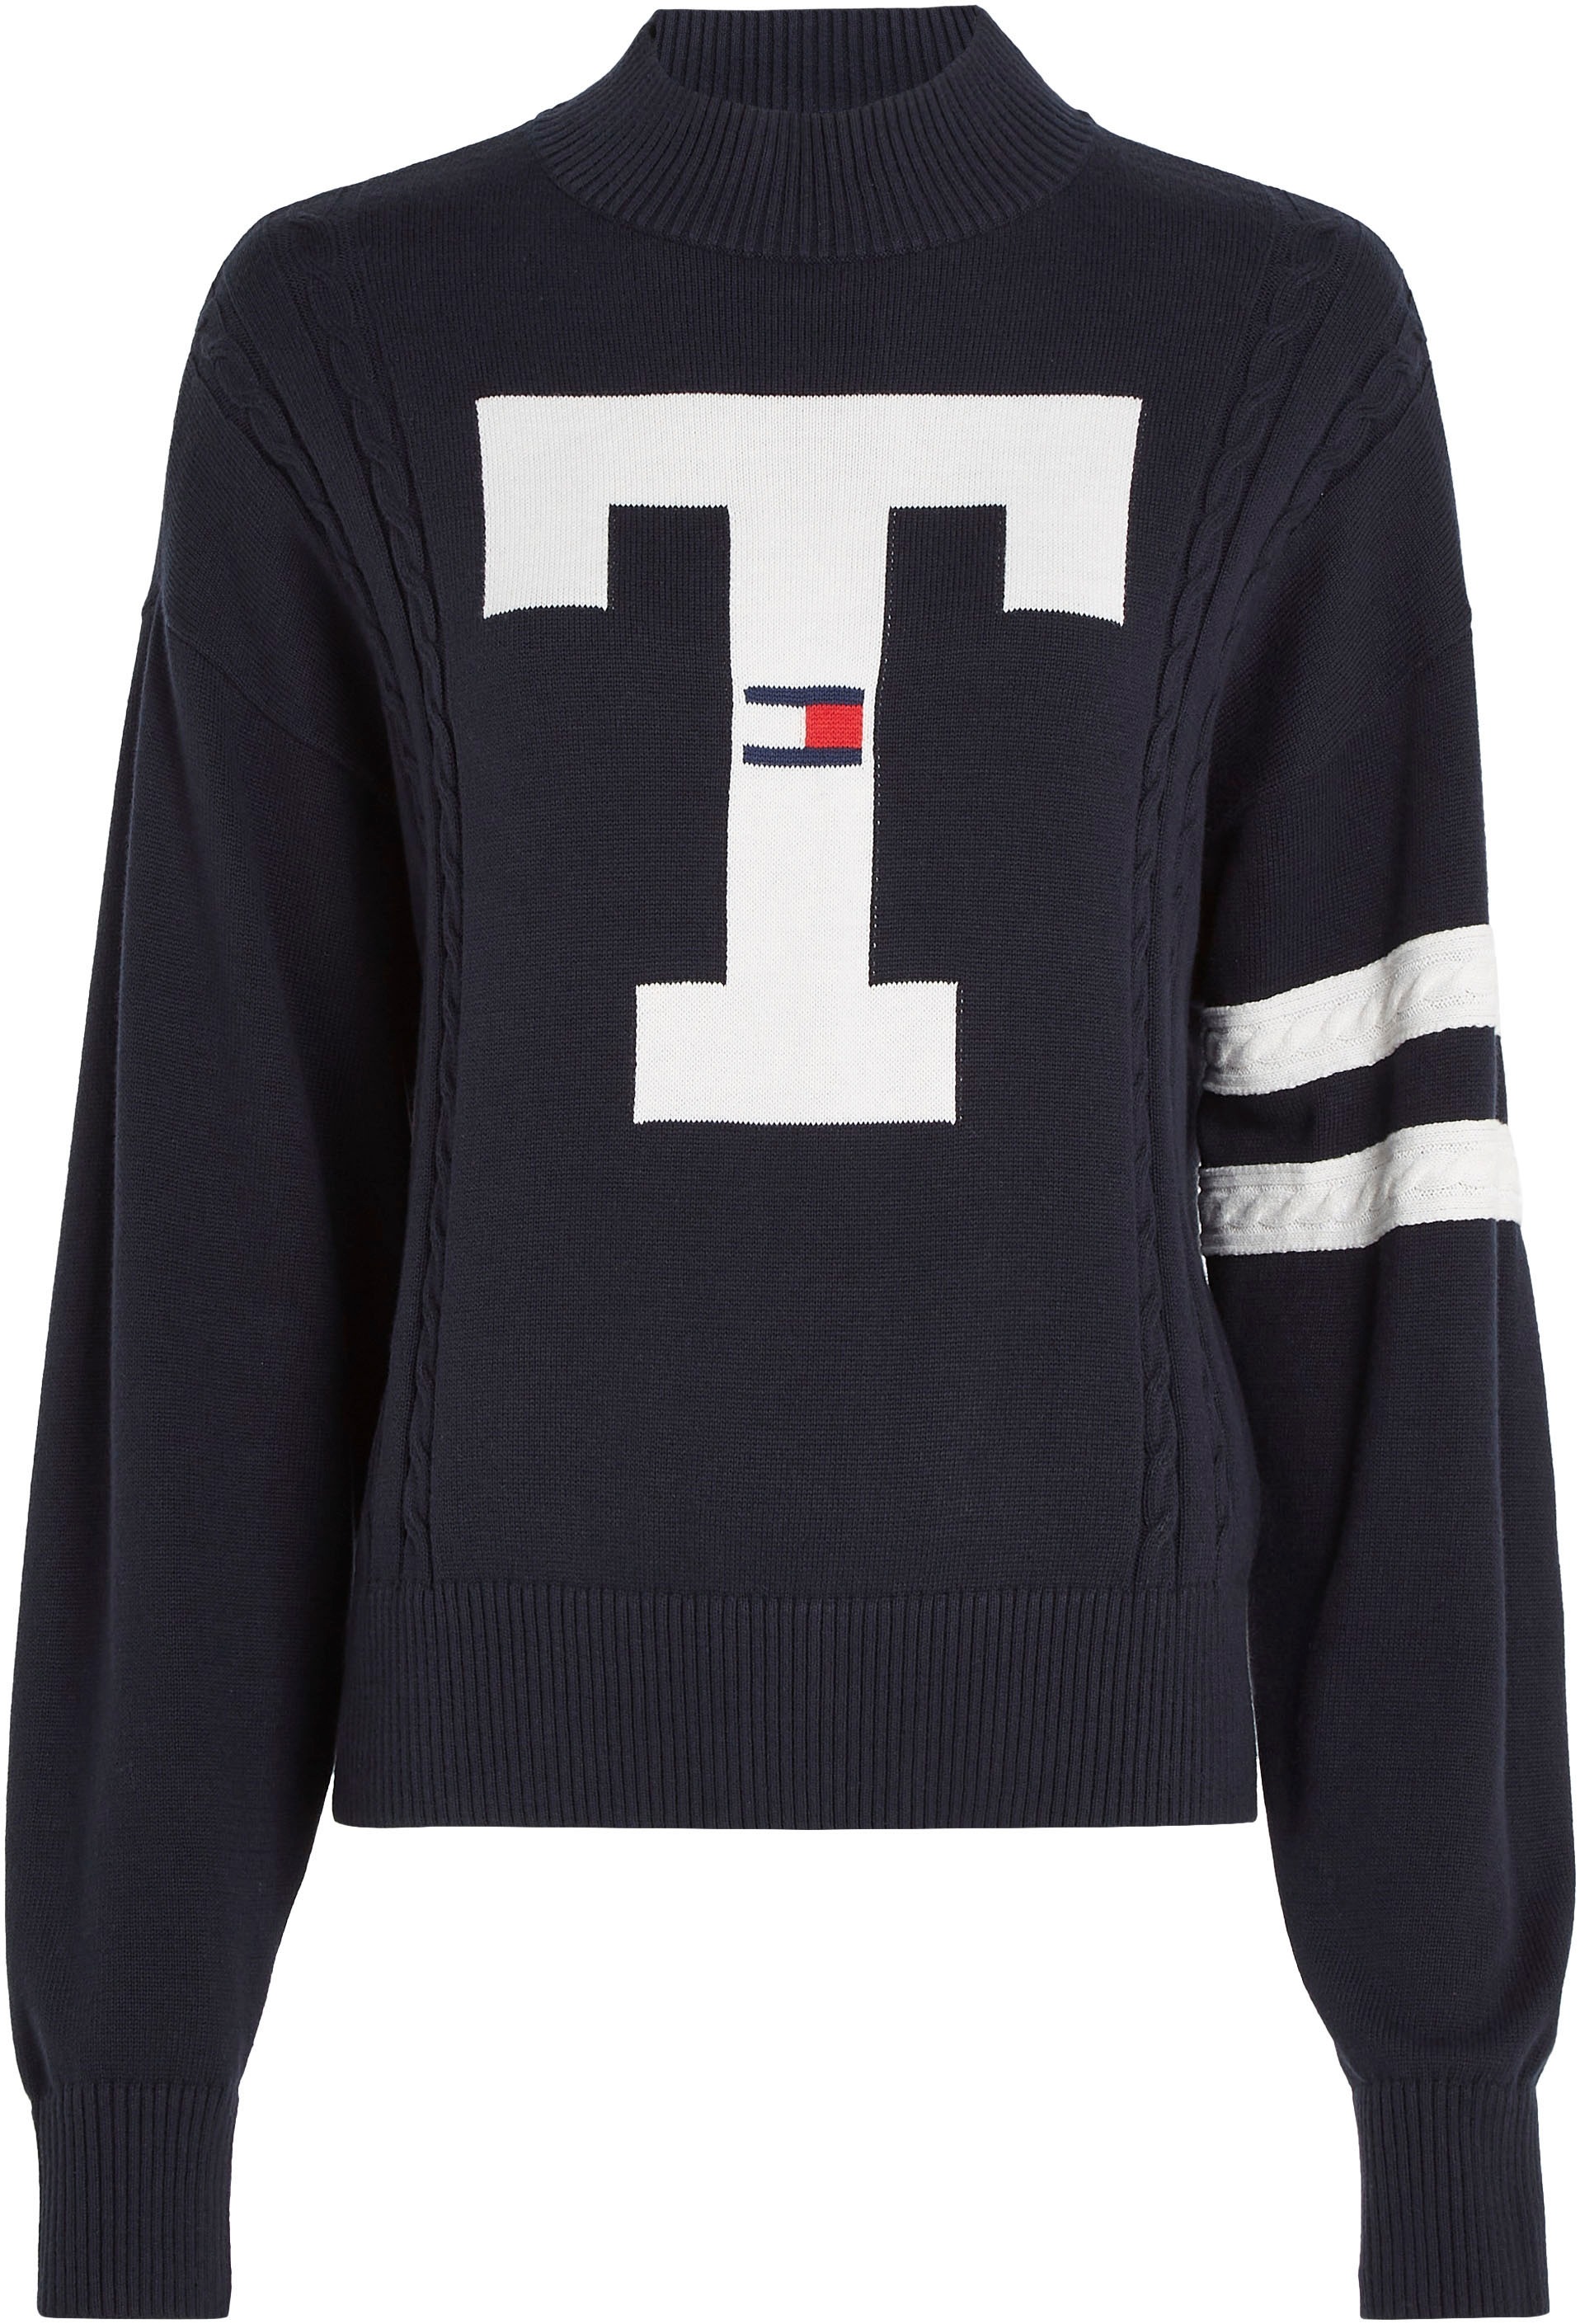 Tommy Jeans Strickpullover »TJW Stickereien I\'m Jeans SWEATER«, LETTERMAN mit Patches | und FLAG Tommy walking online